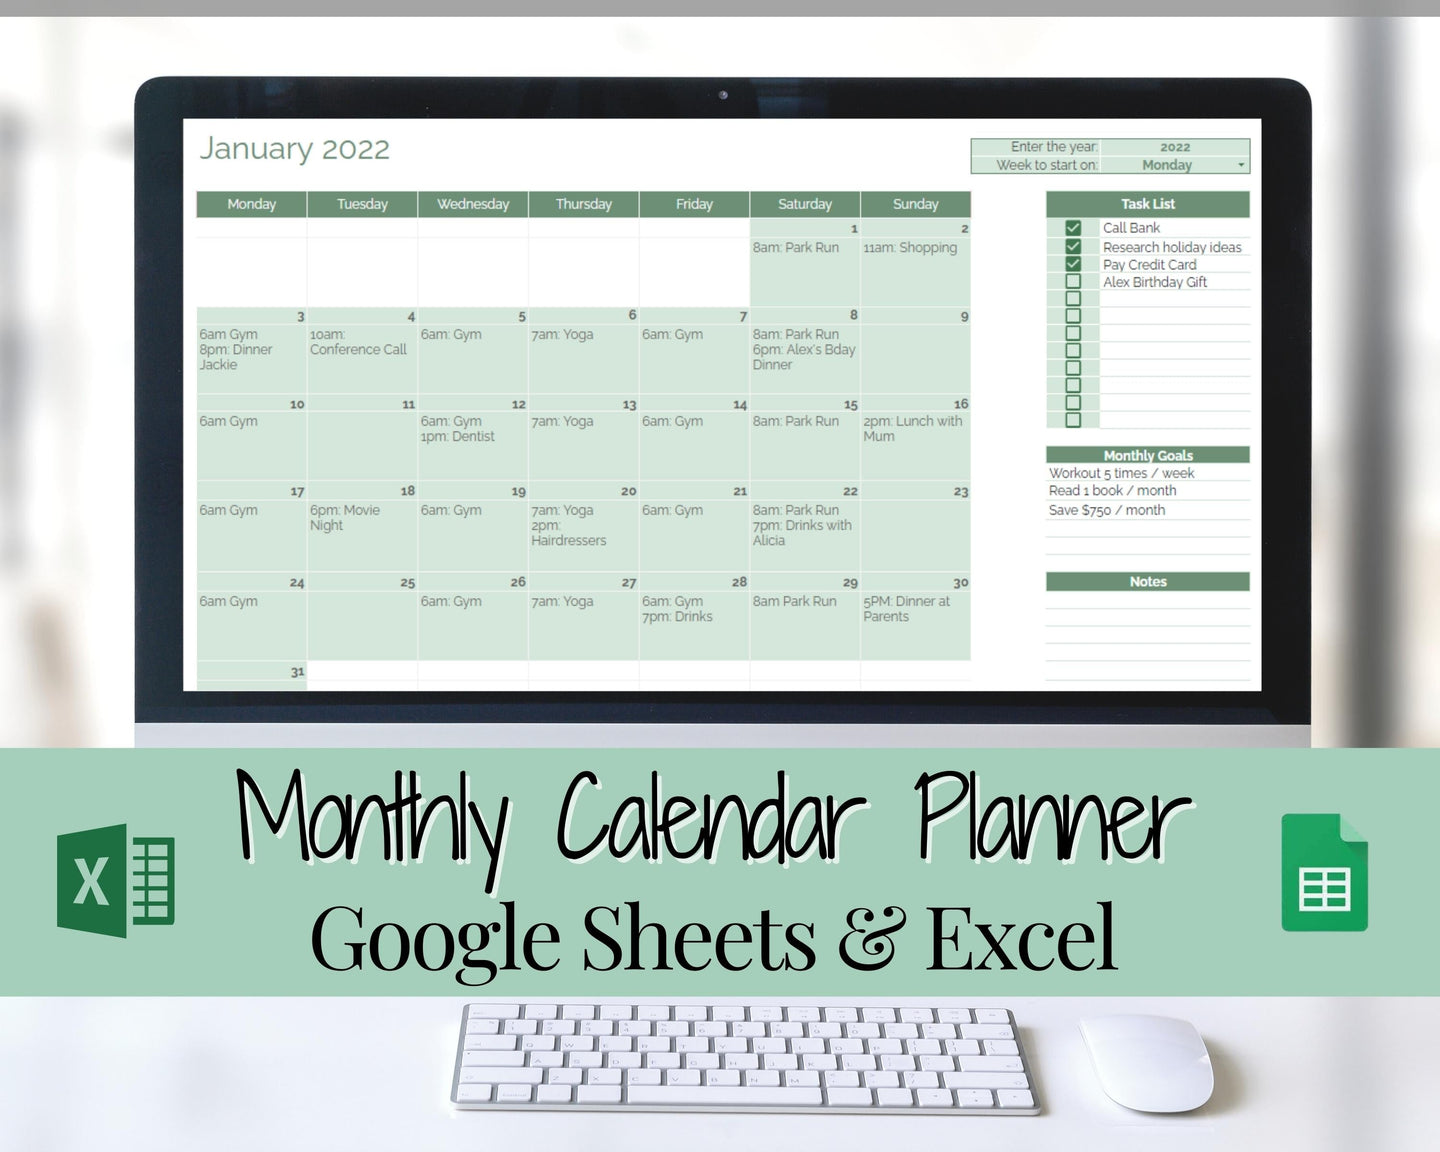 Monthly Calendar Planner Spreadsheet, Automated Template, Google Sheets, Excel, Annual, Editable To Do List, Undated Schedule, Overview - Green